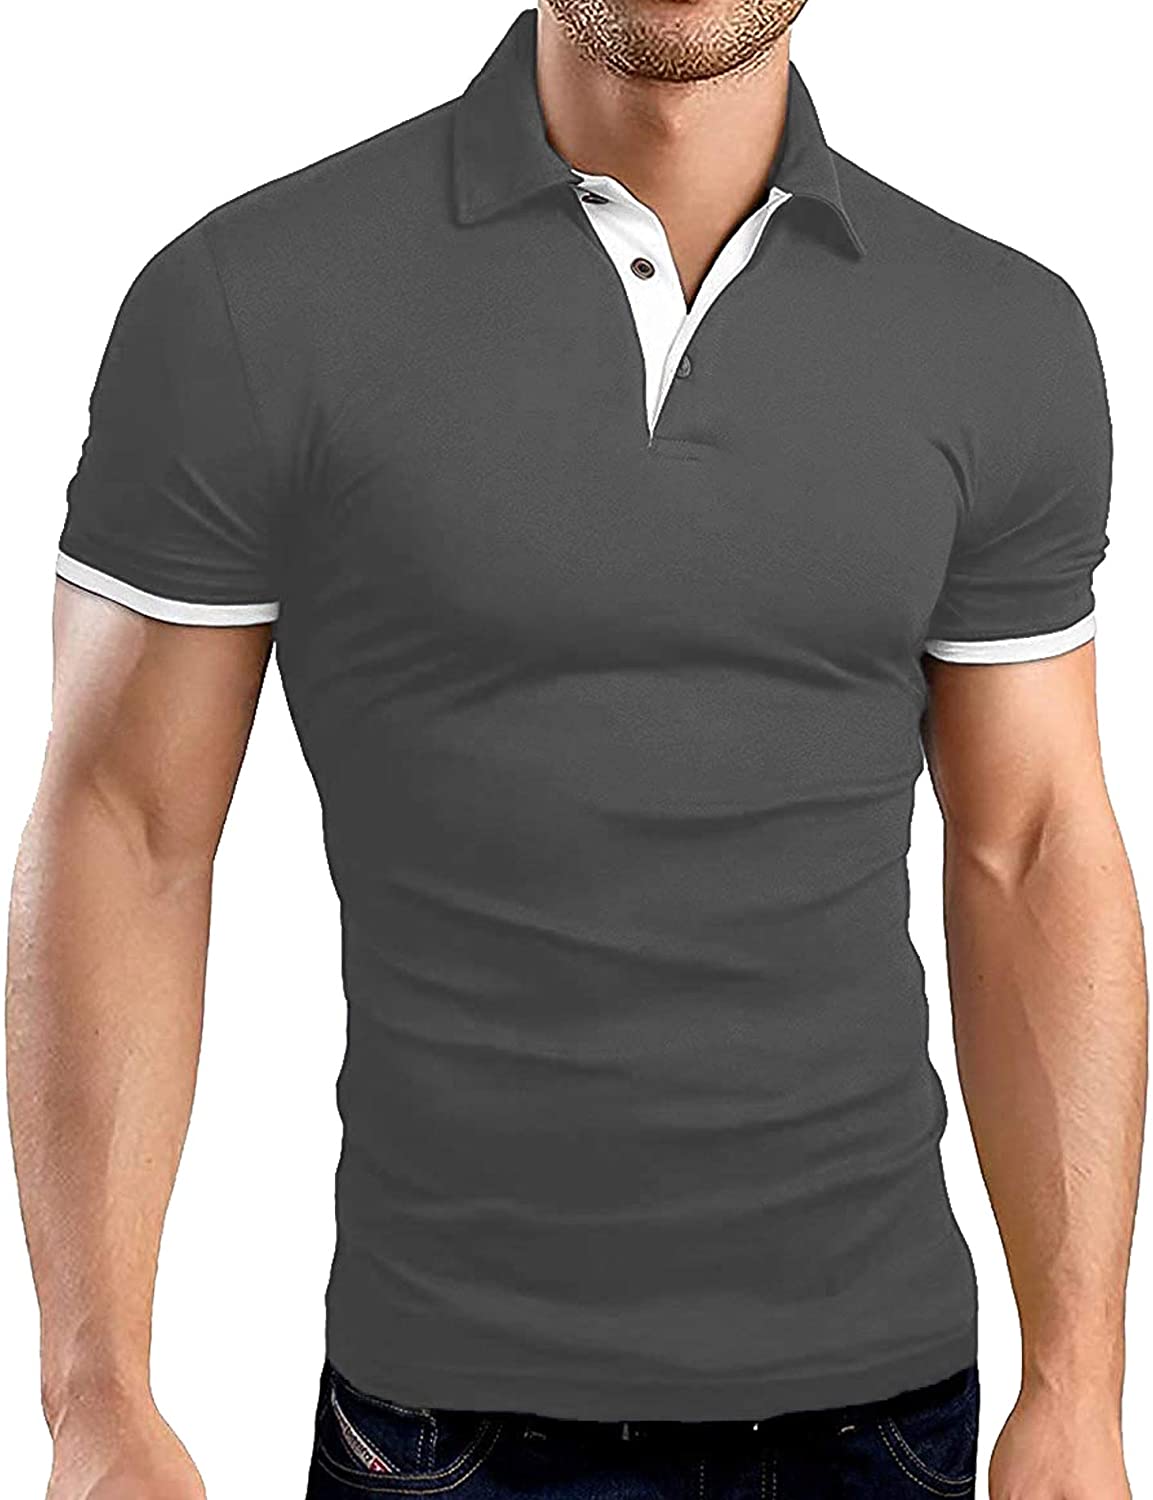 ZITY Mens Polo Shirt Cool Quick-Dry Sweat-Wicking Color Block 